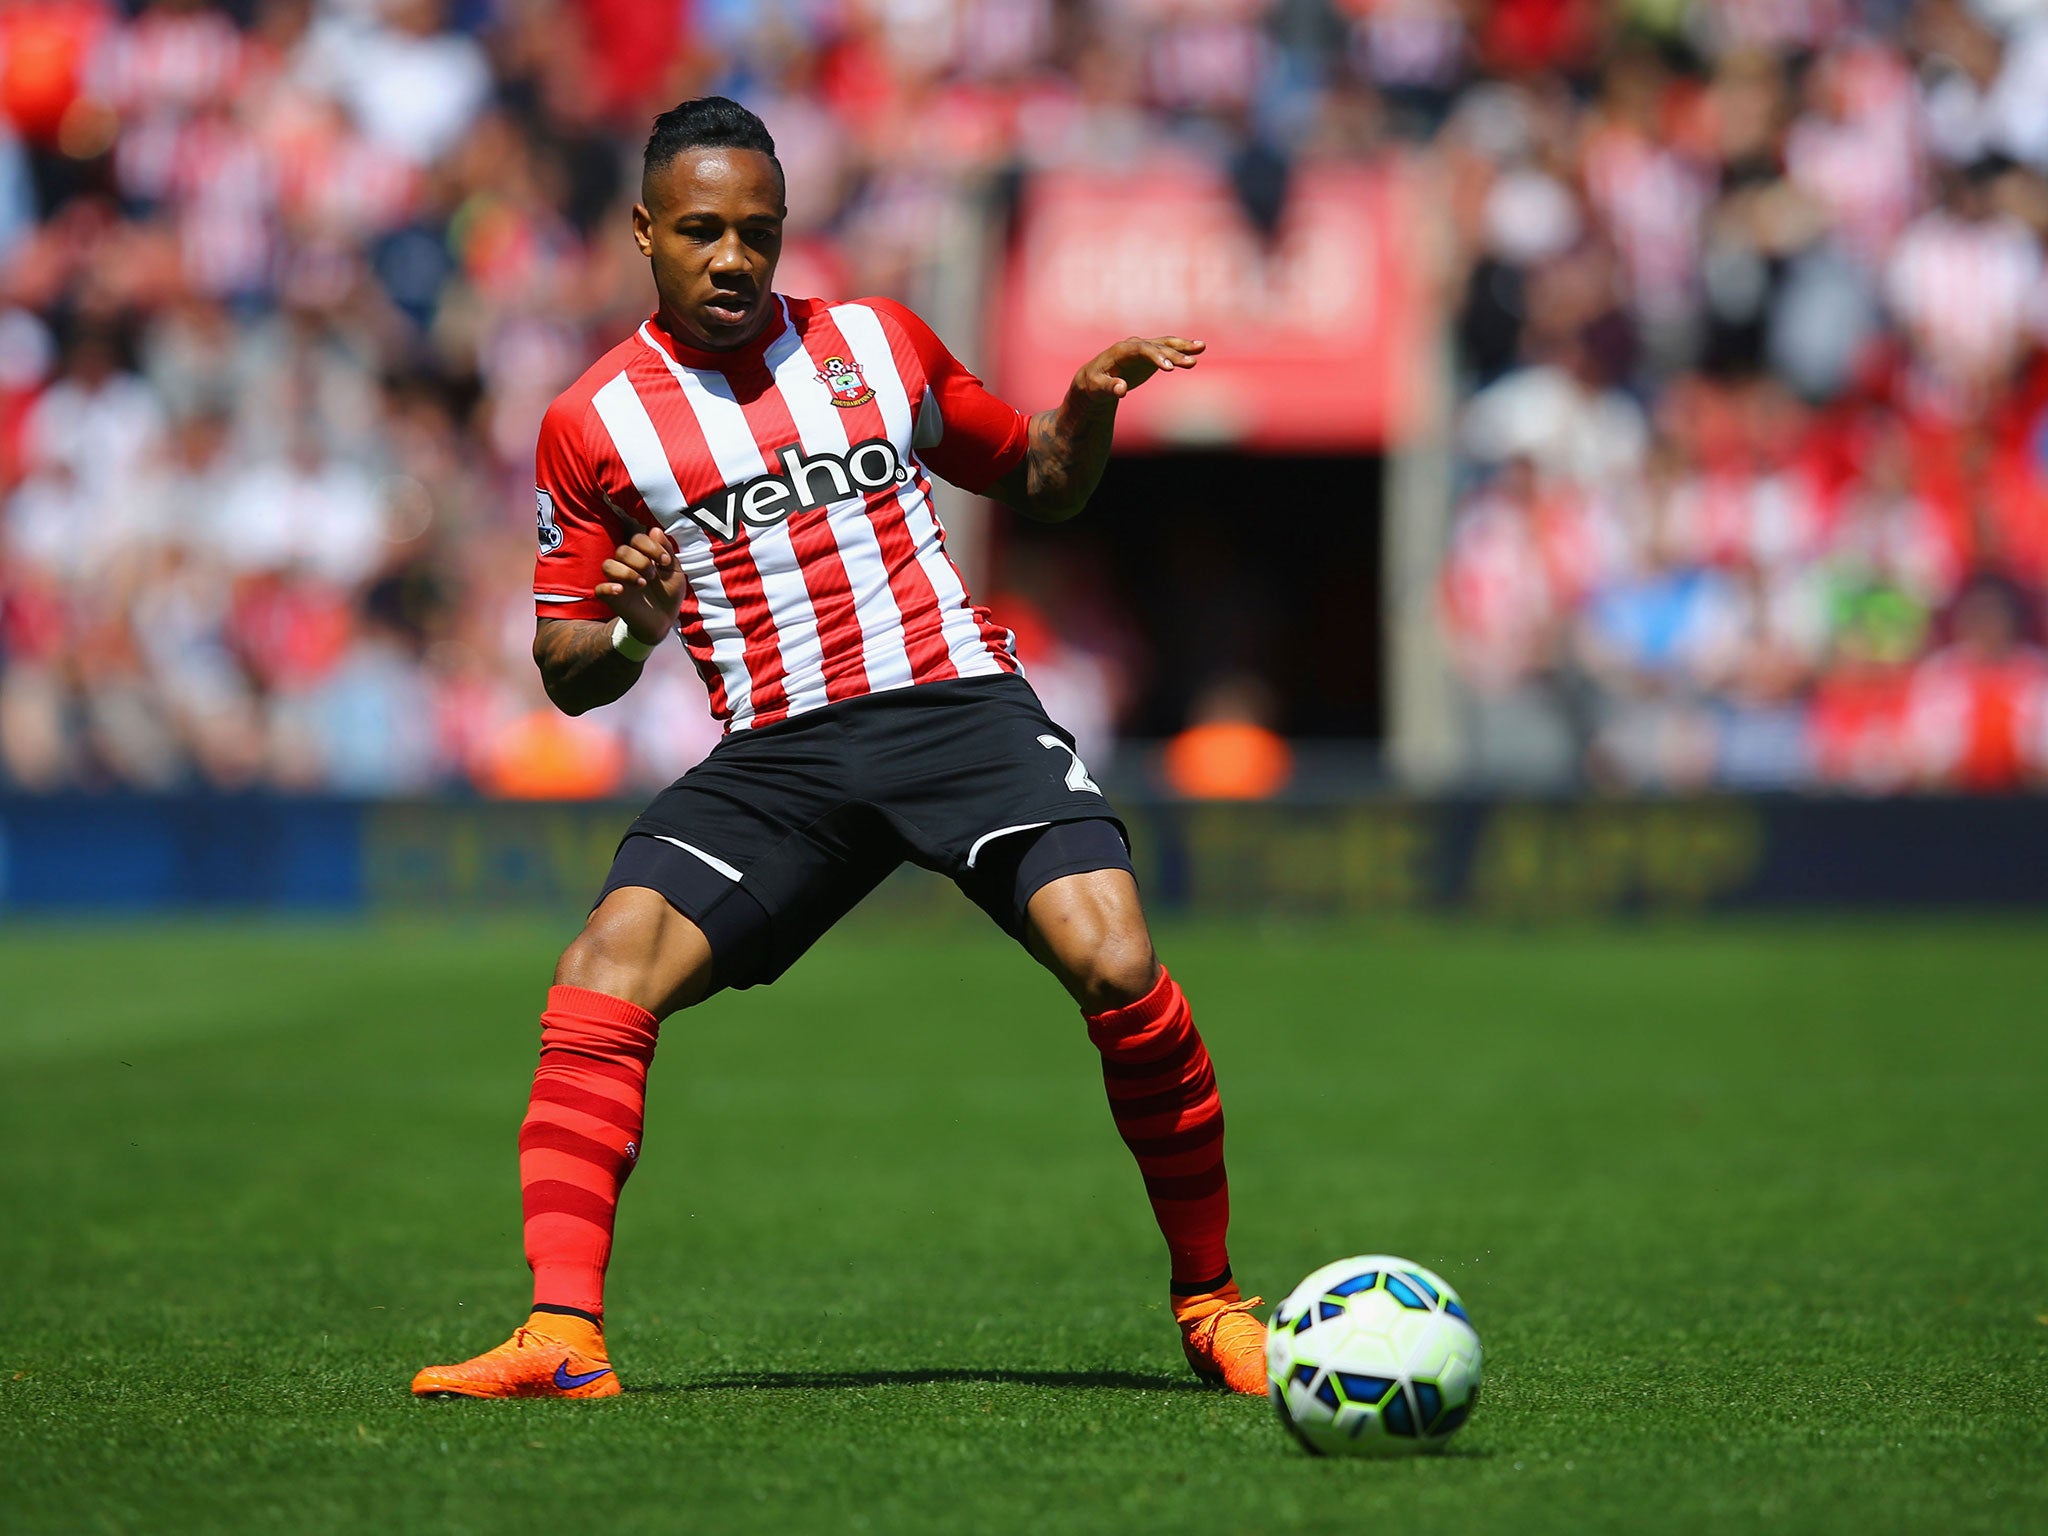 Nathaniel Clyne has been linked with a move to Liverpool and Manchester United